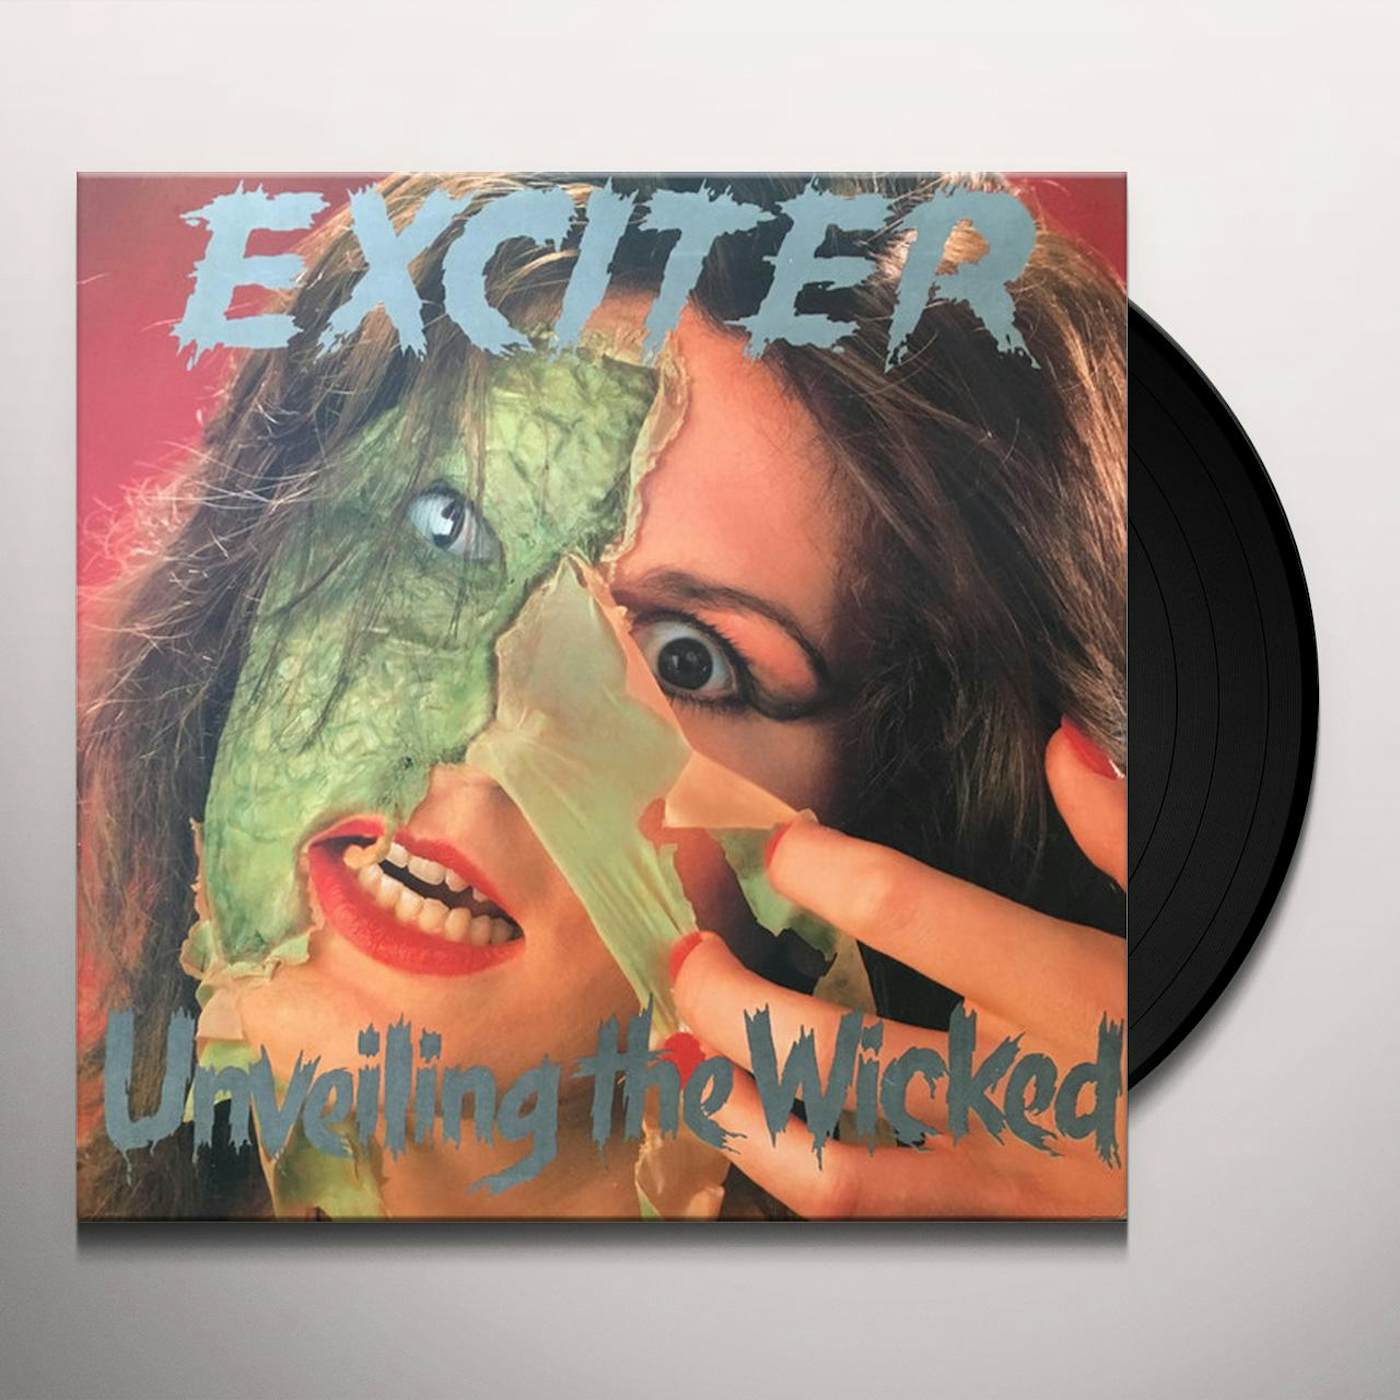 Exciter Unveiling The Wicked Vinyl Record